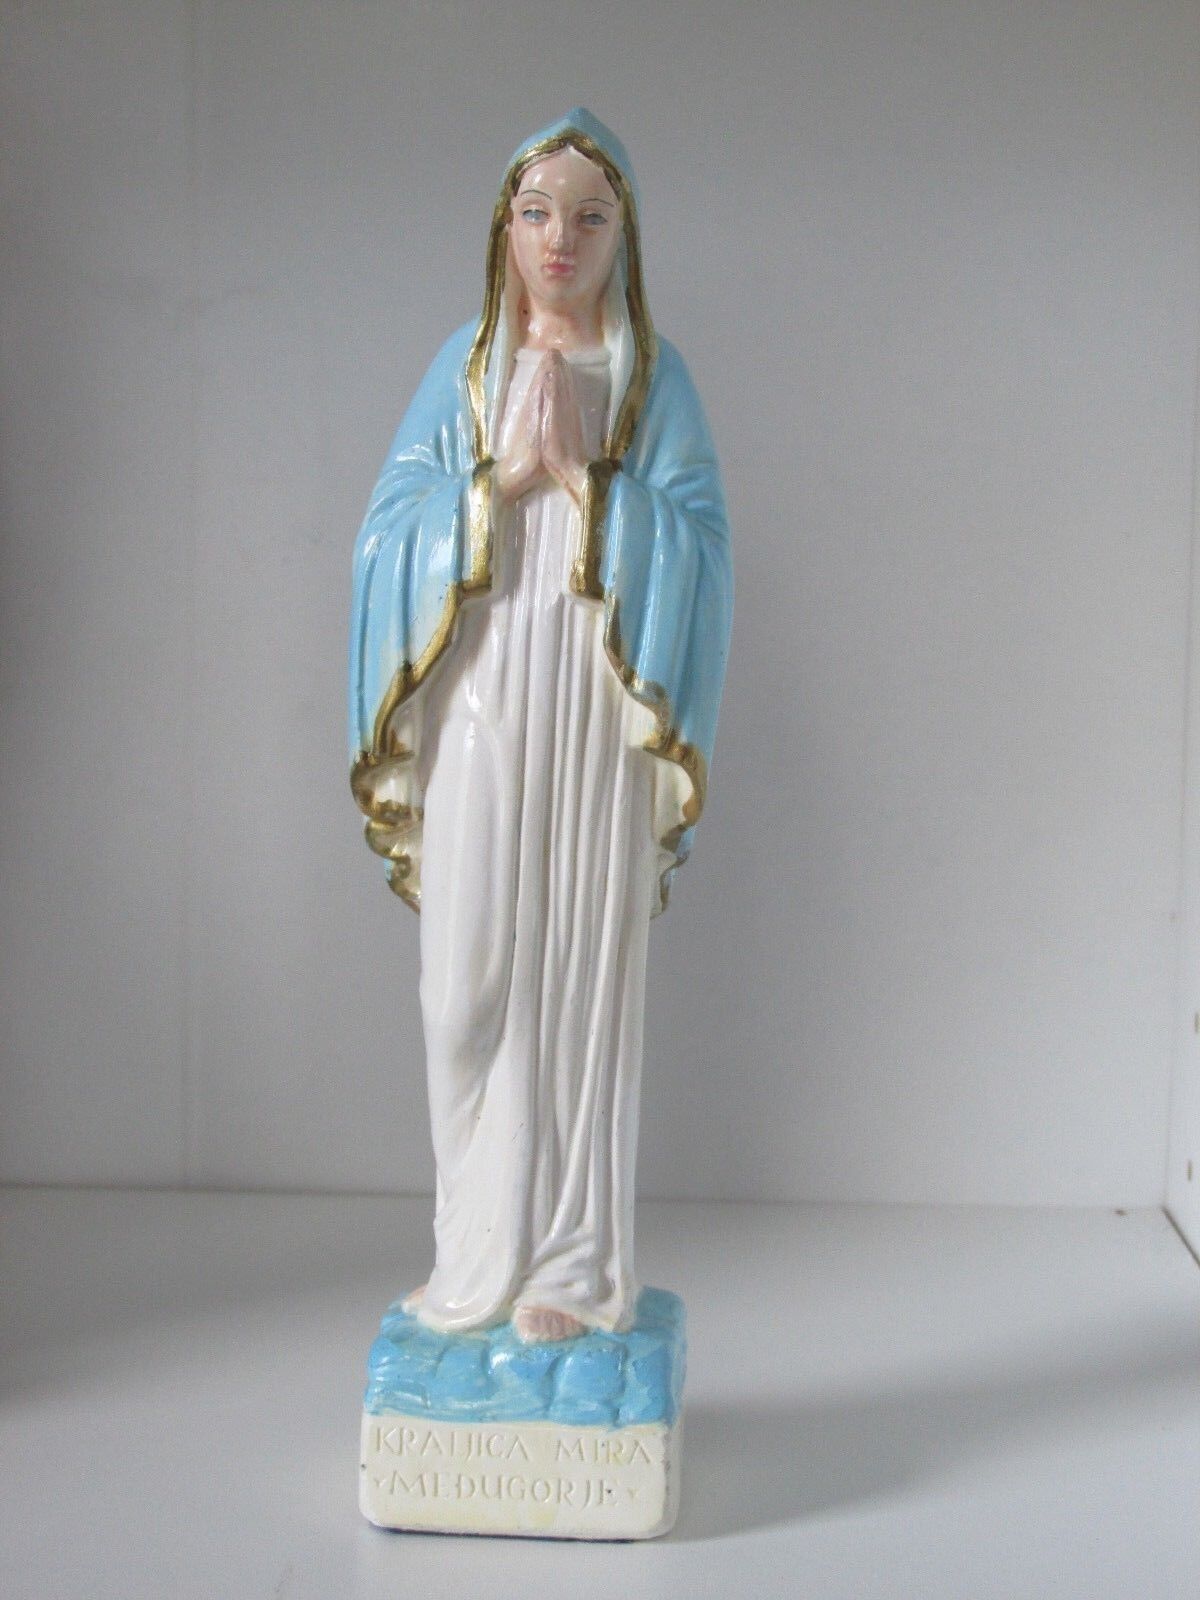 Our Lady of Medjugorje statue